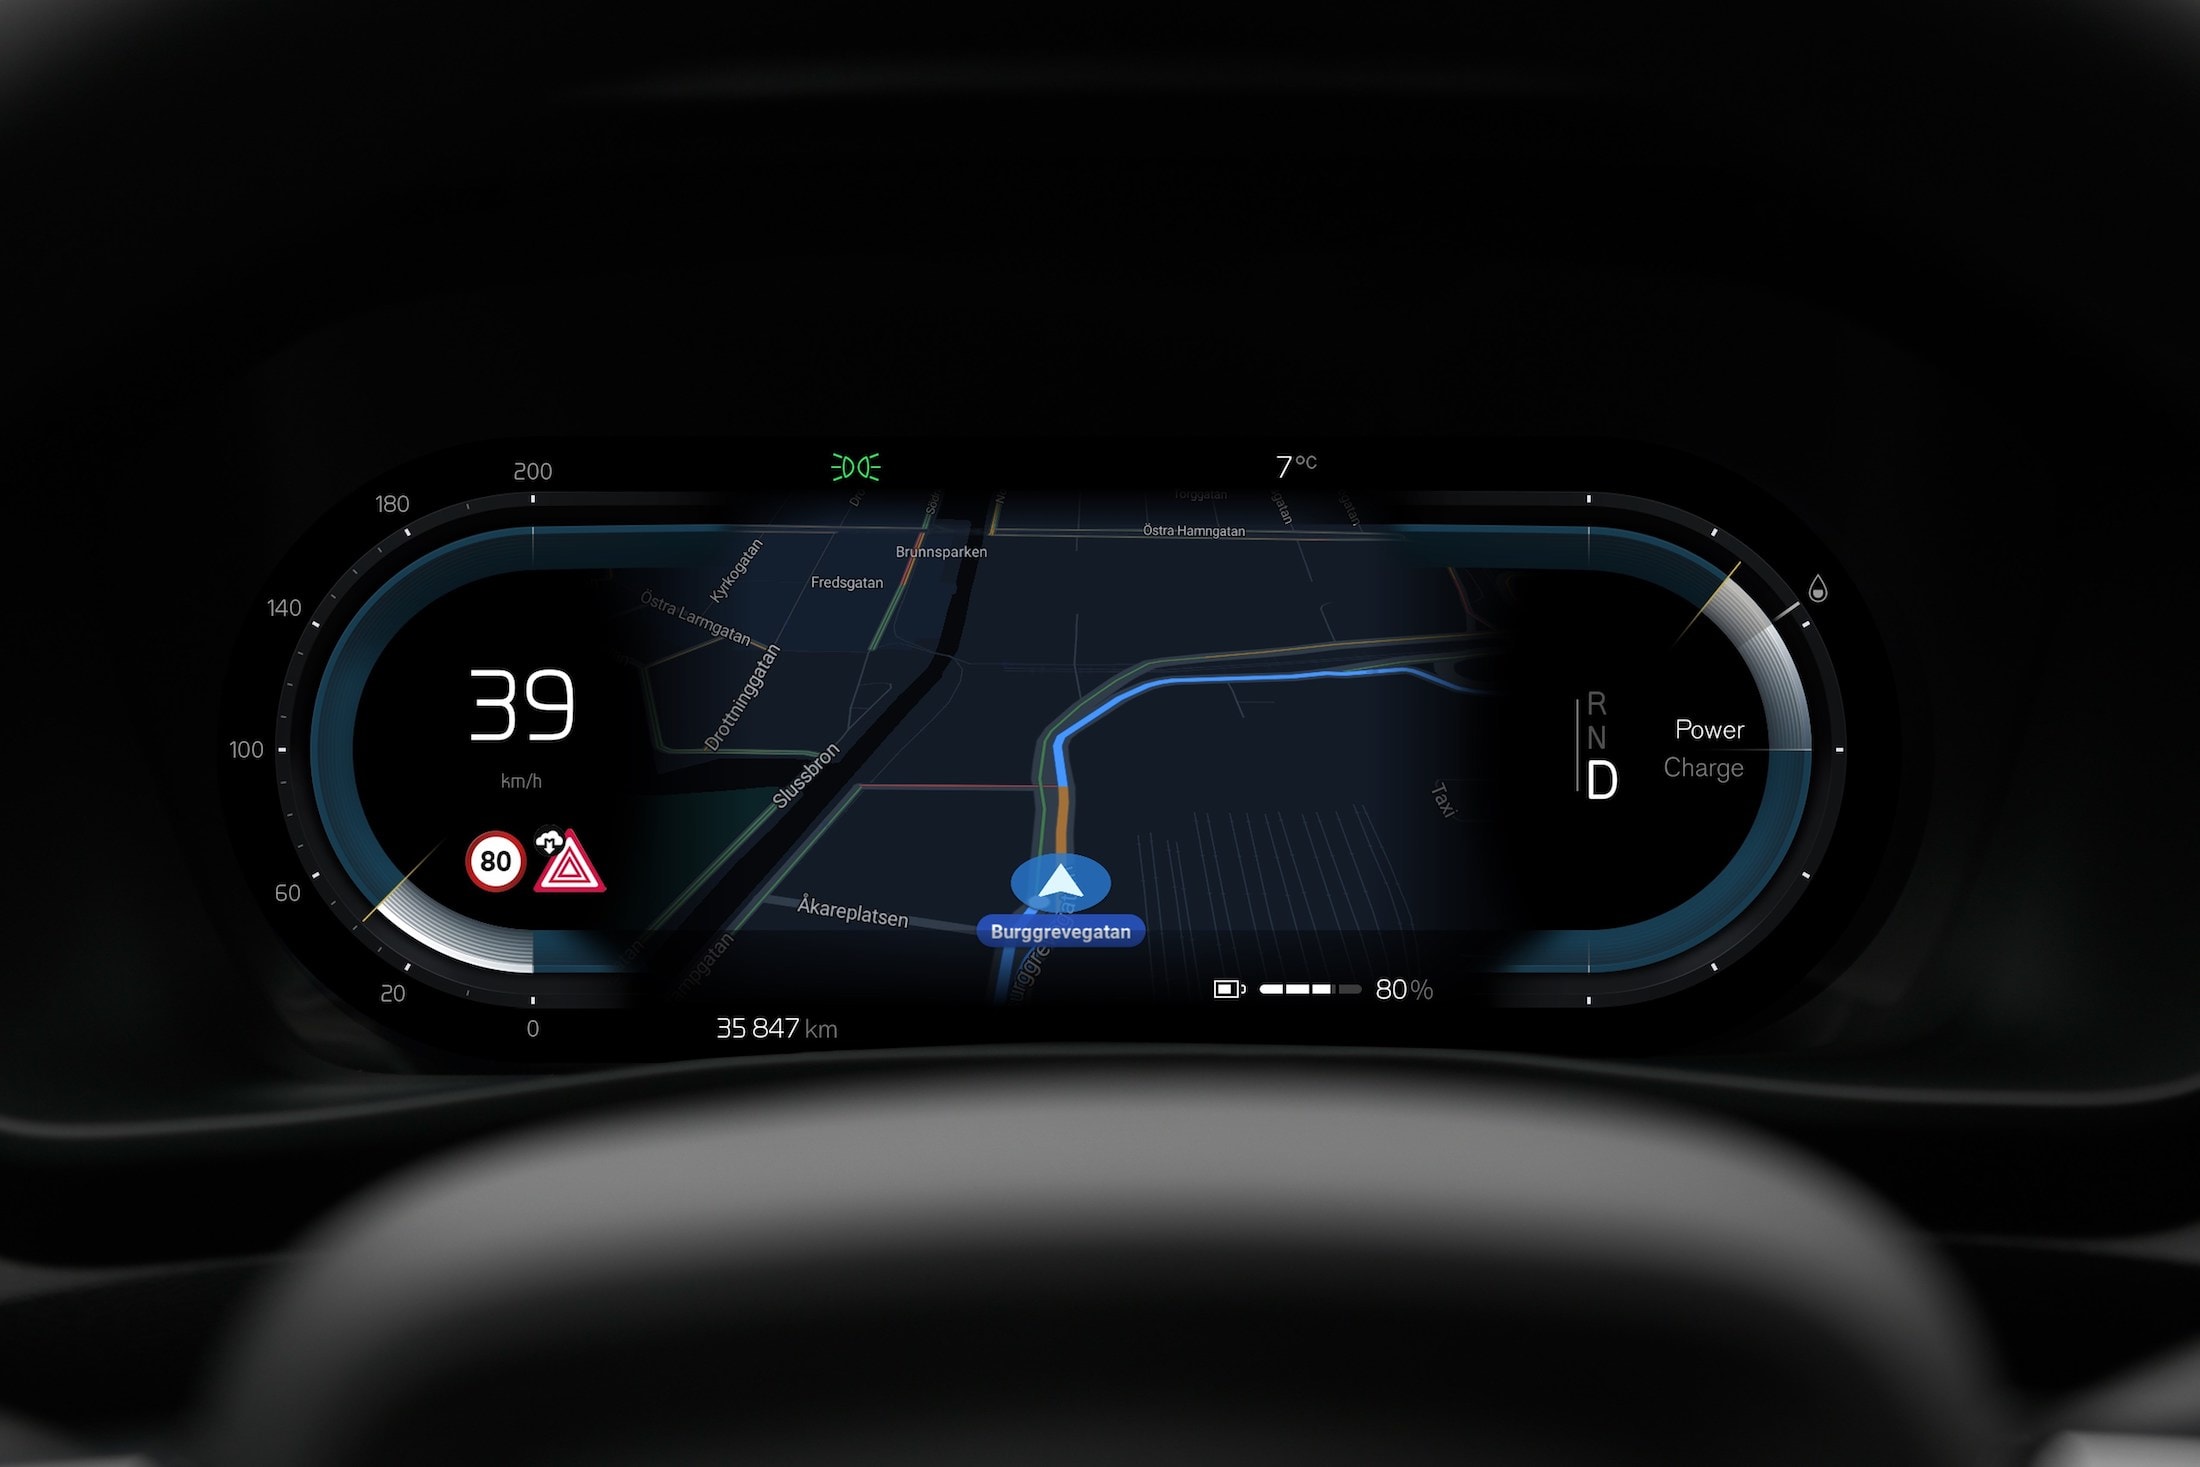 Volvo's Connected Safety Feature Alerting Drivers of Accidents Ahead